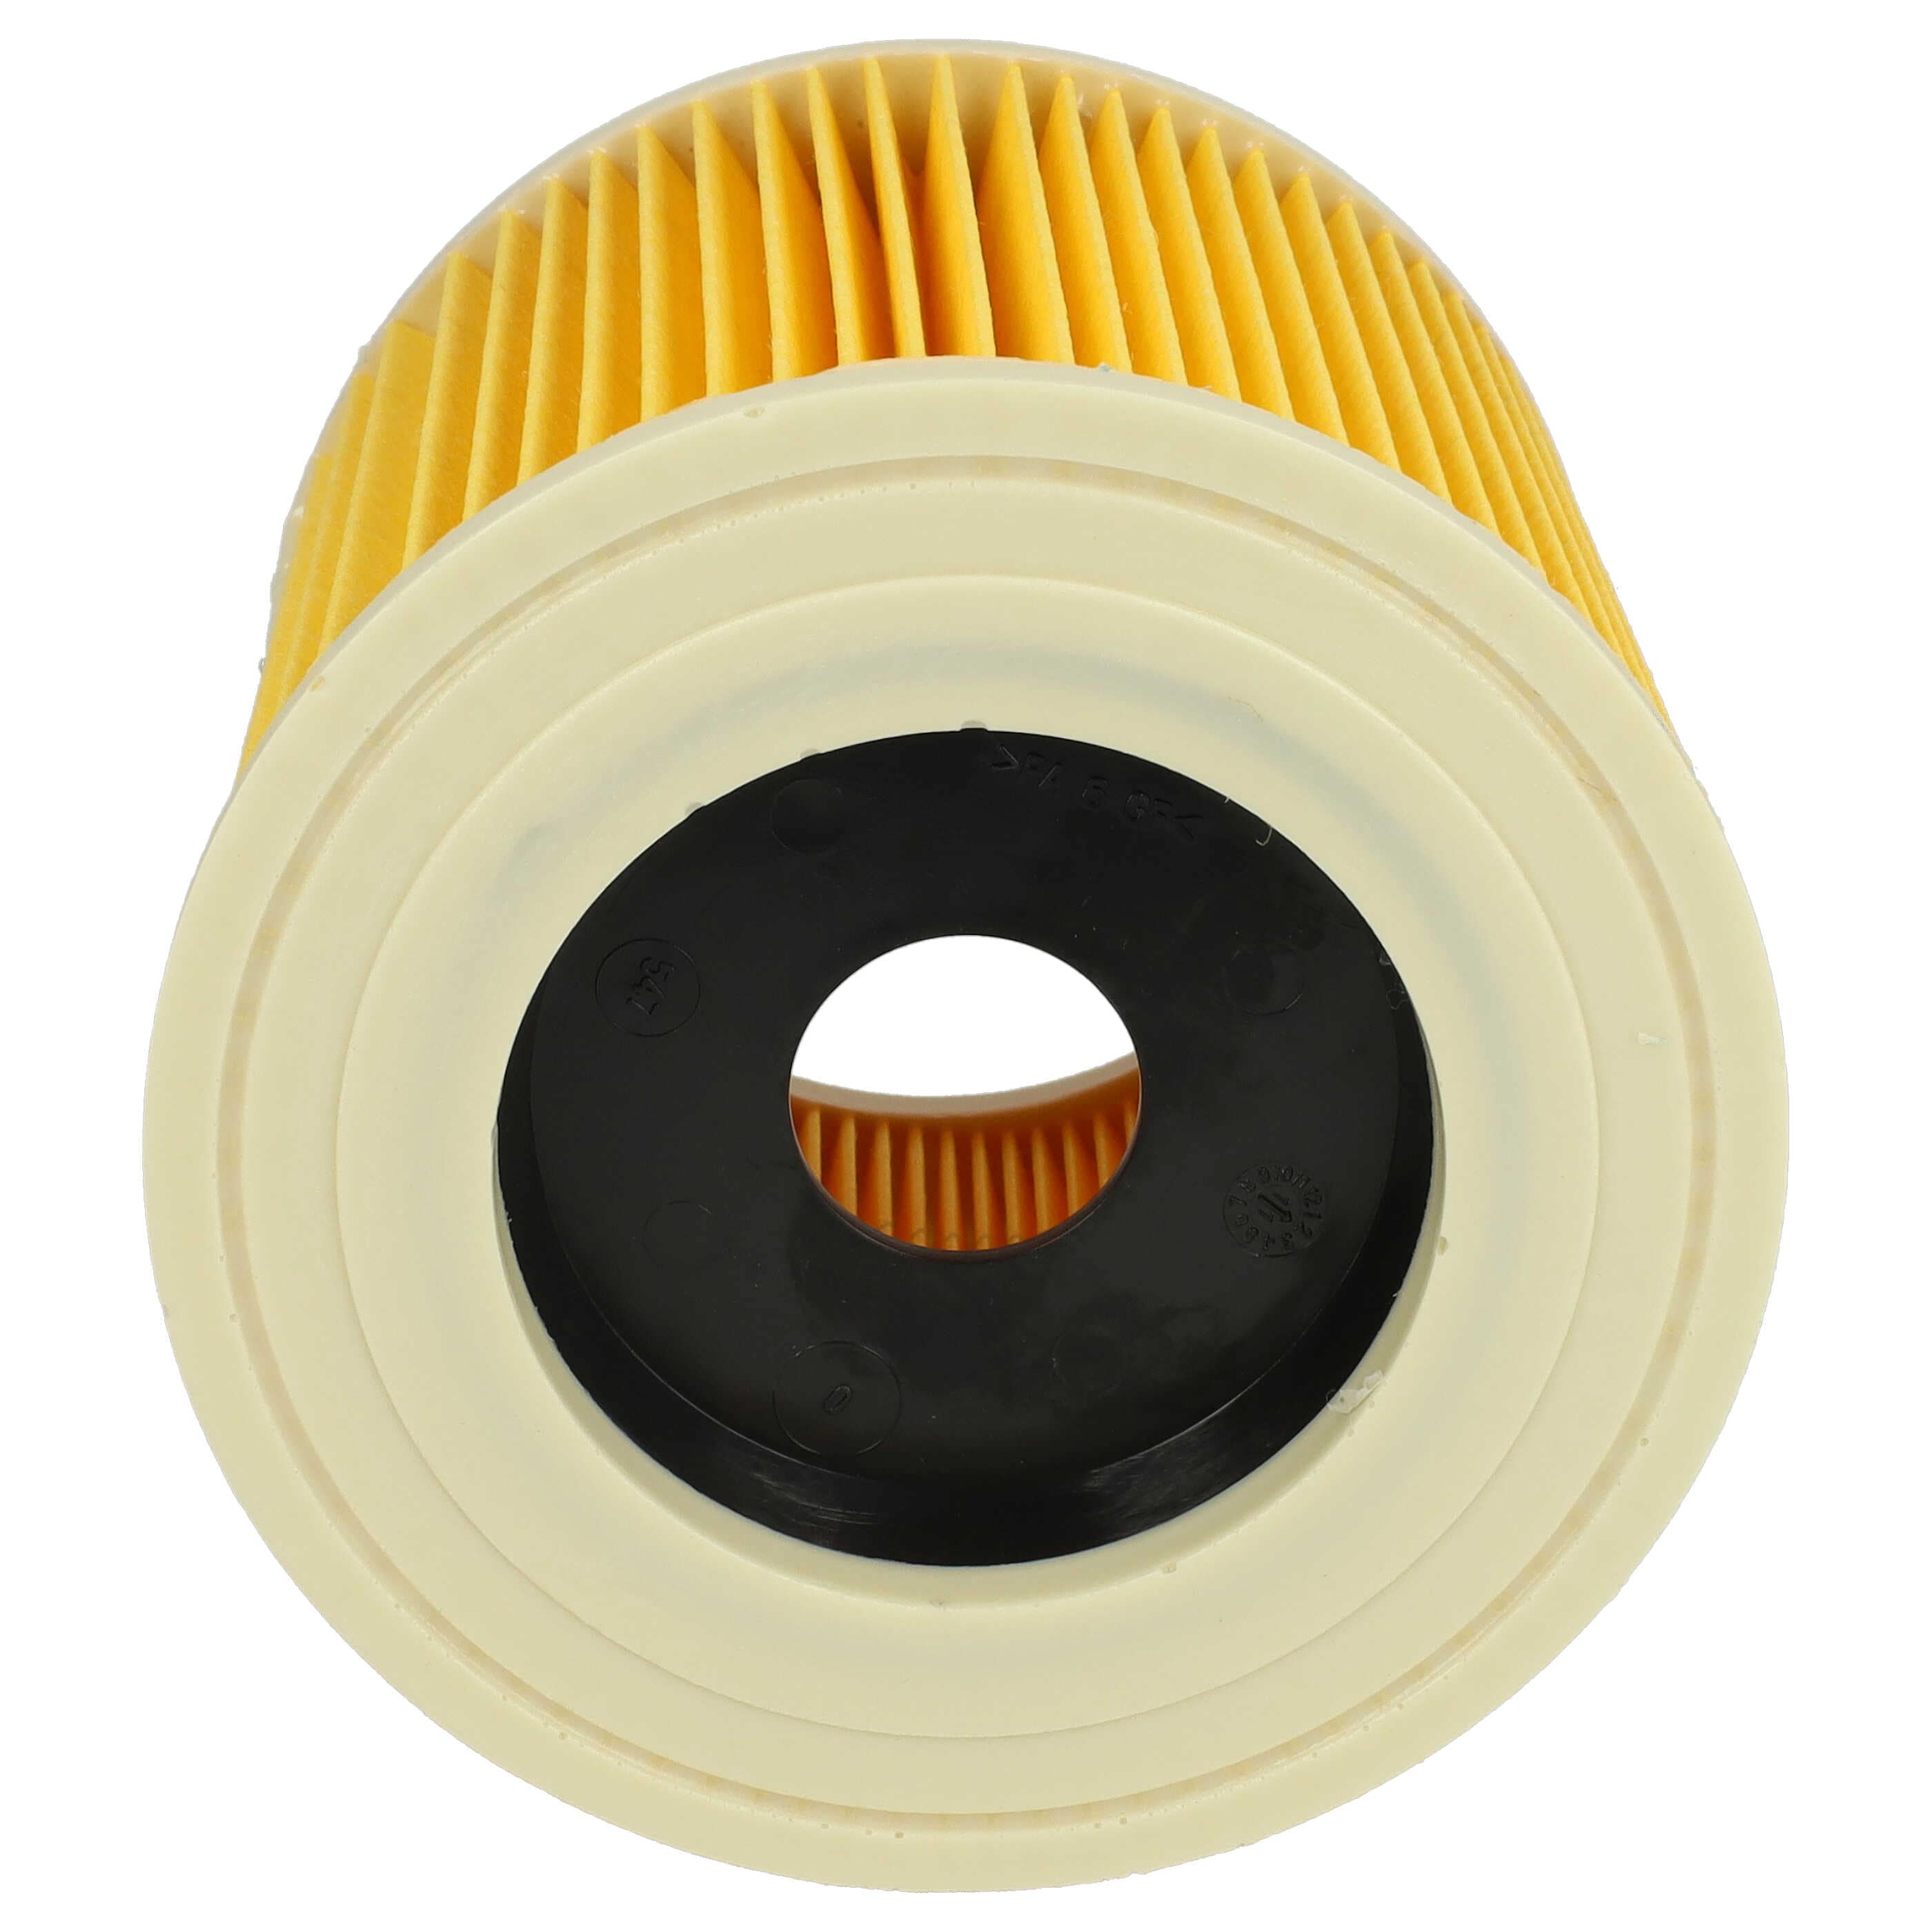 3x cartridge filter replaces Kärcher 2.863-303.0, 6.414-552.0, 6.414-547.0 for BaierVacuum Cleaner, yellow